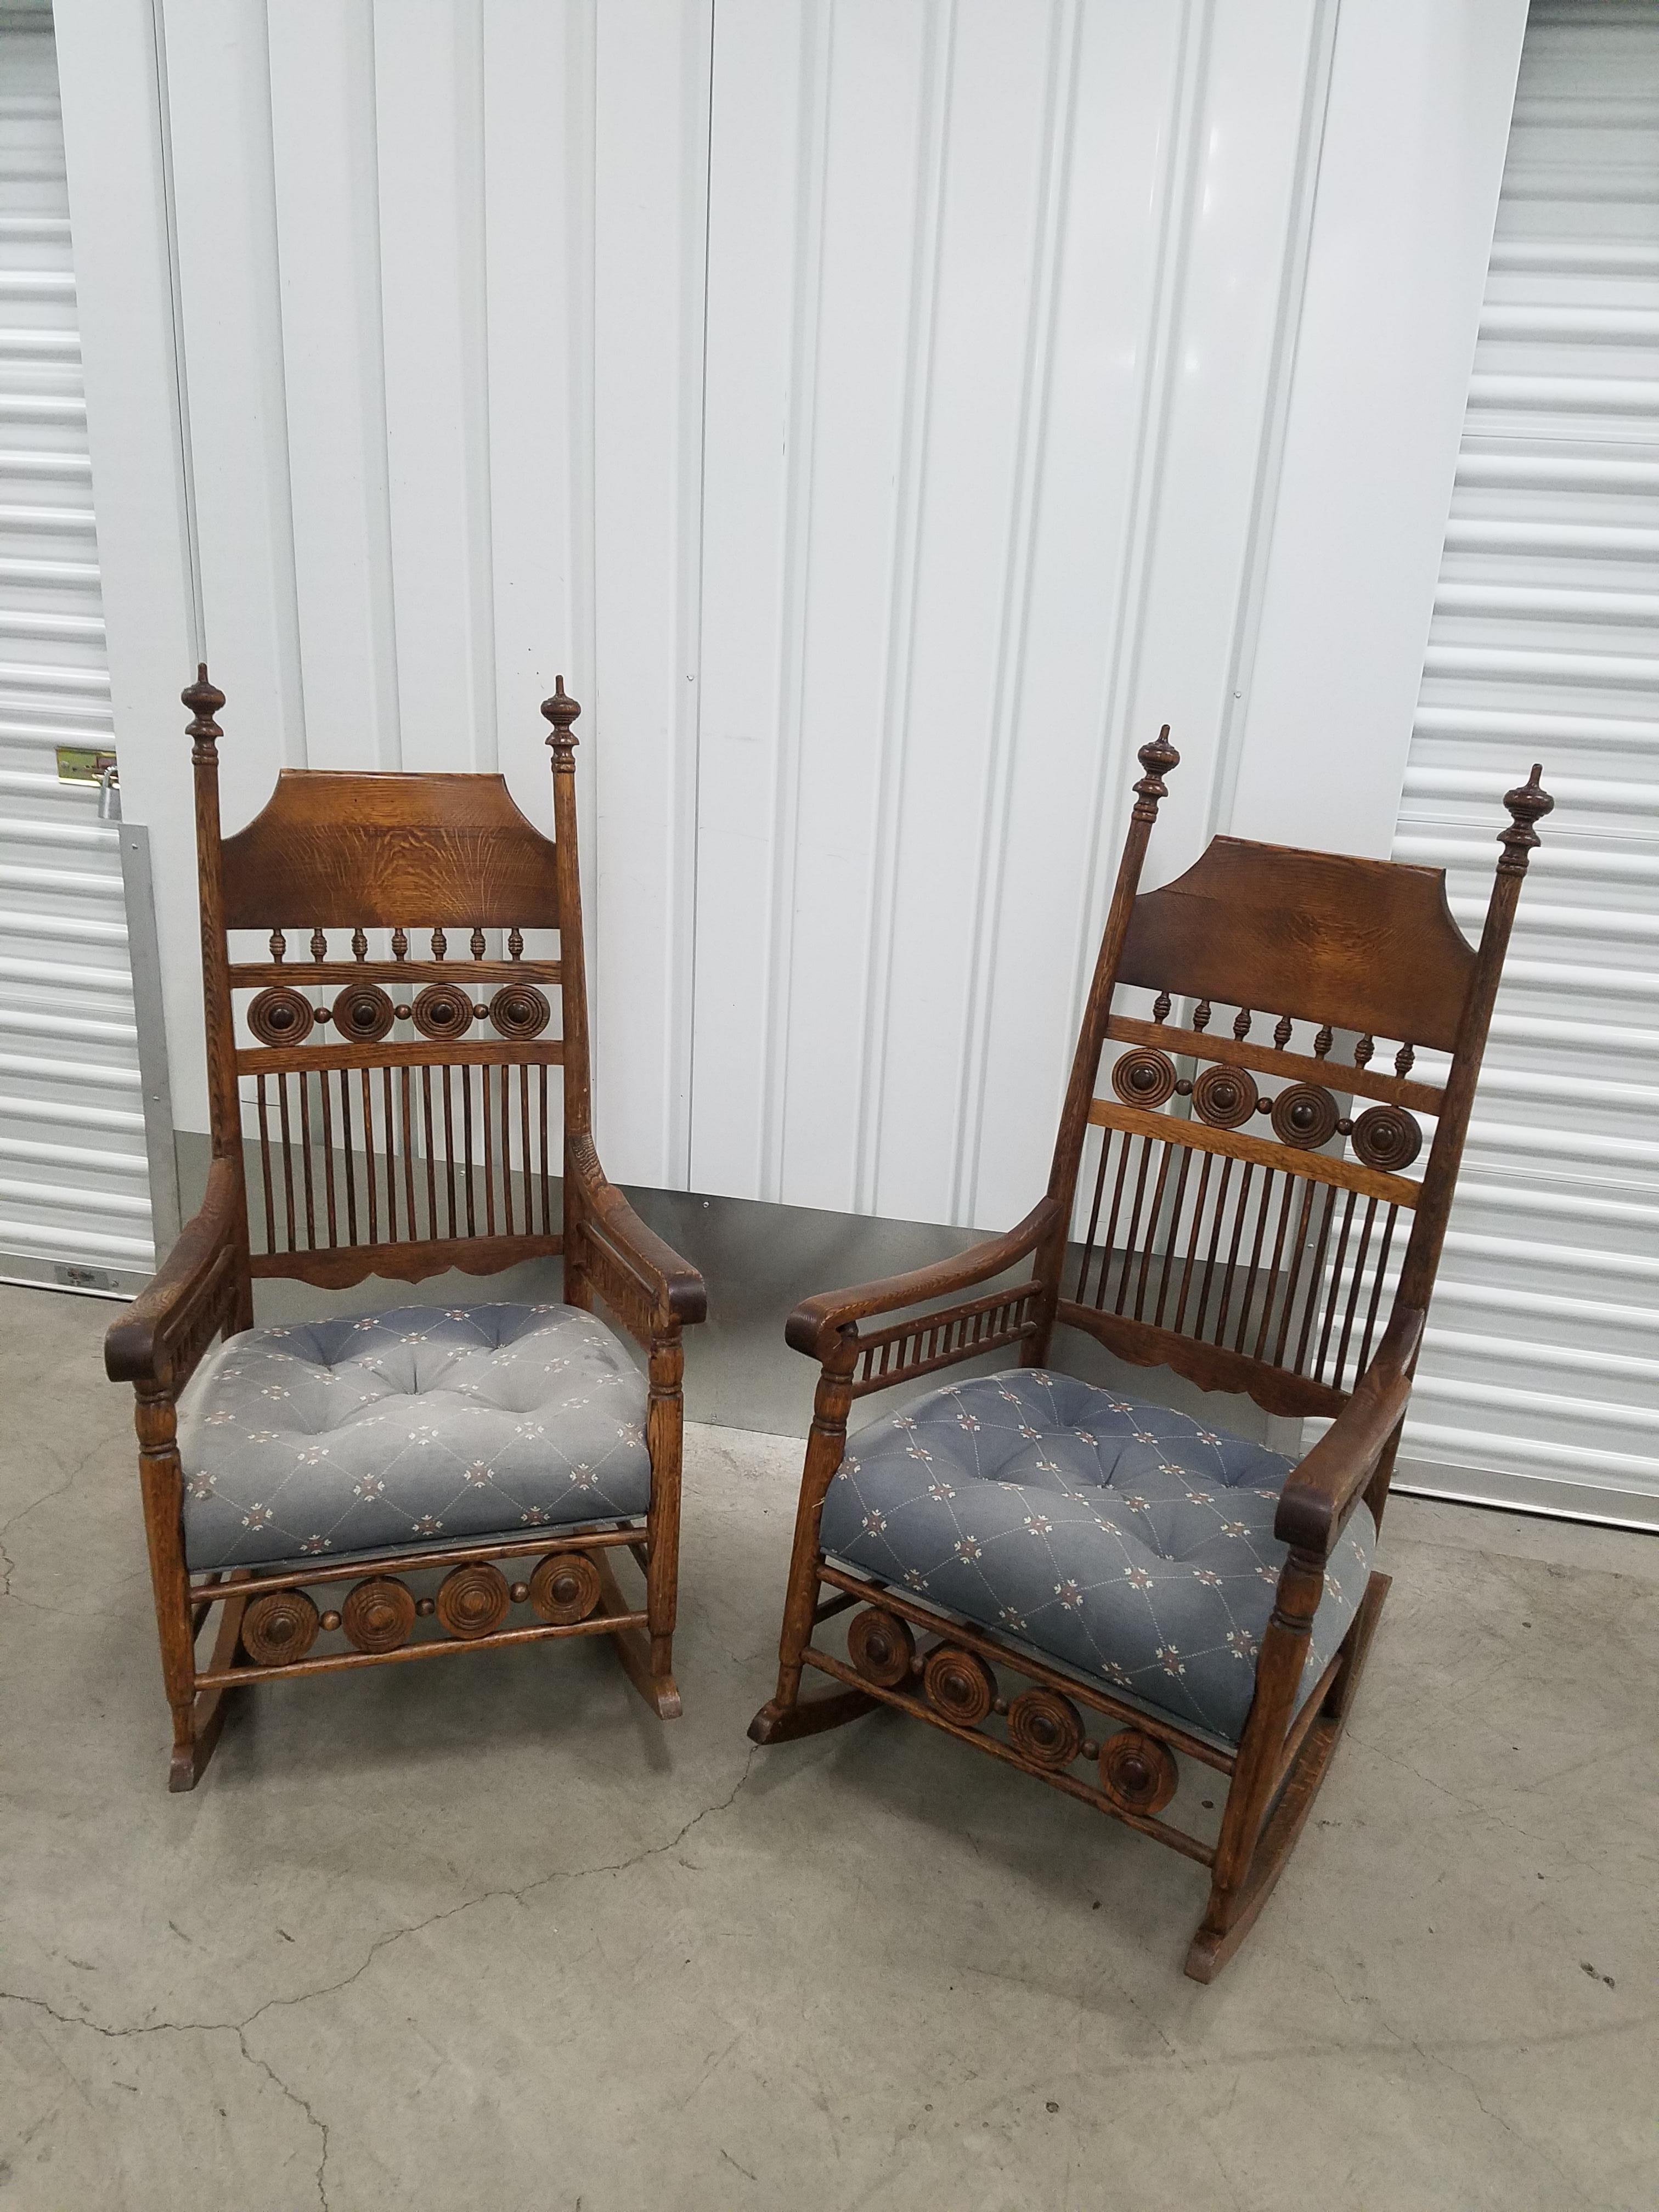 Pair of Victorian Carved Oak Rocking Chairs With Upholstered Seats

24:W x 32